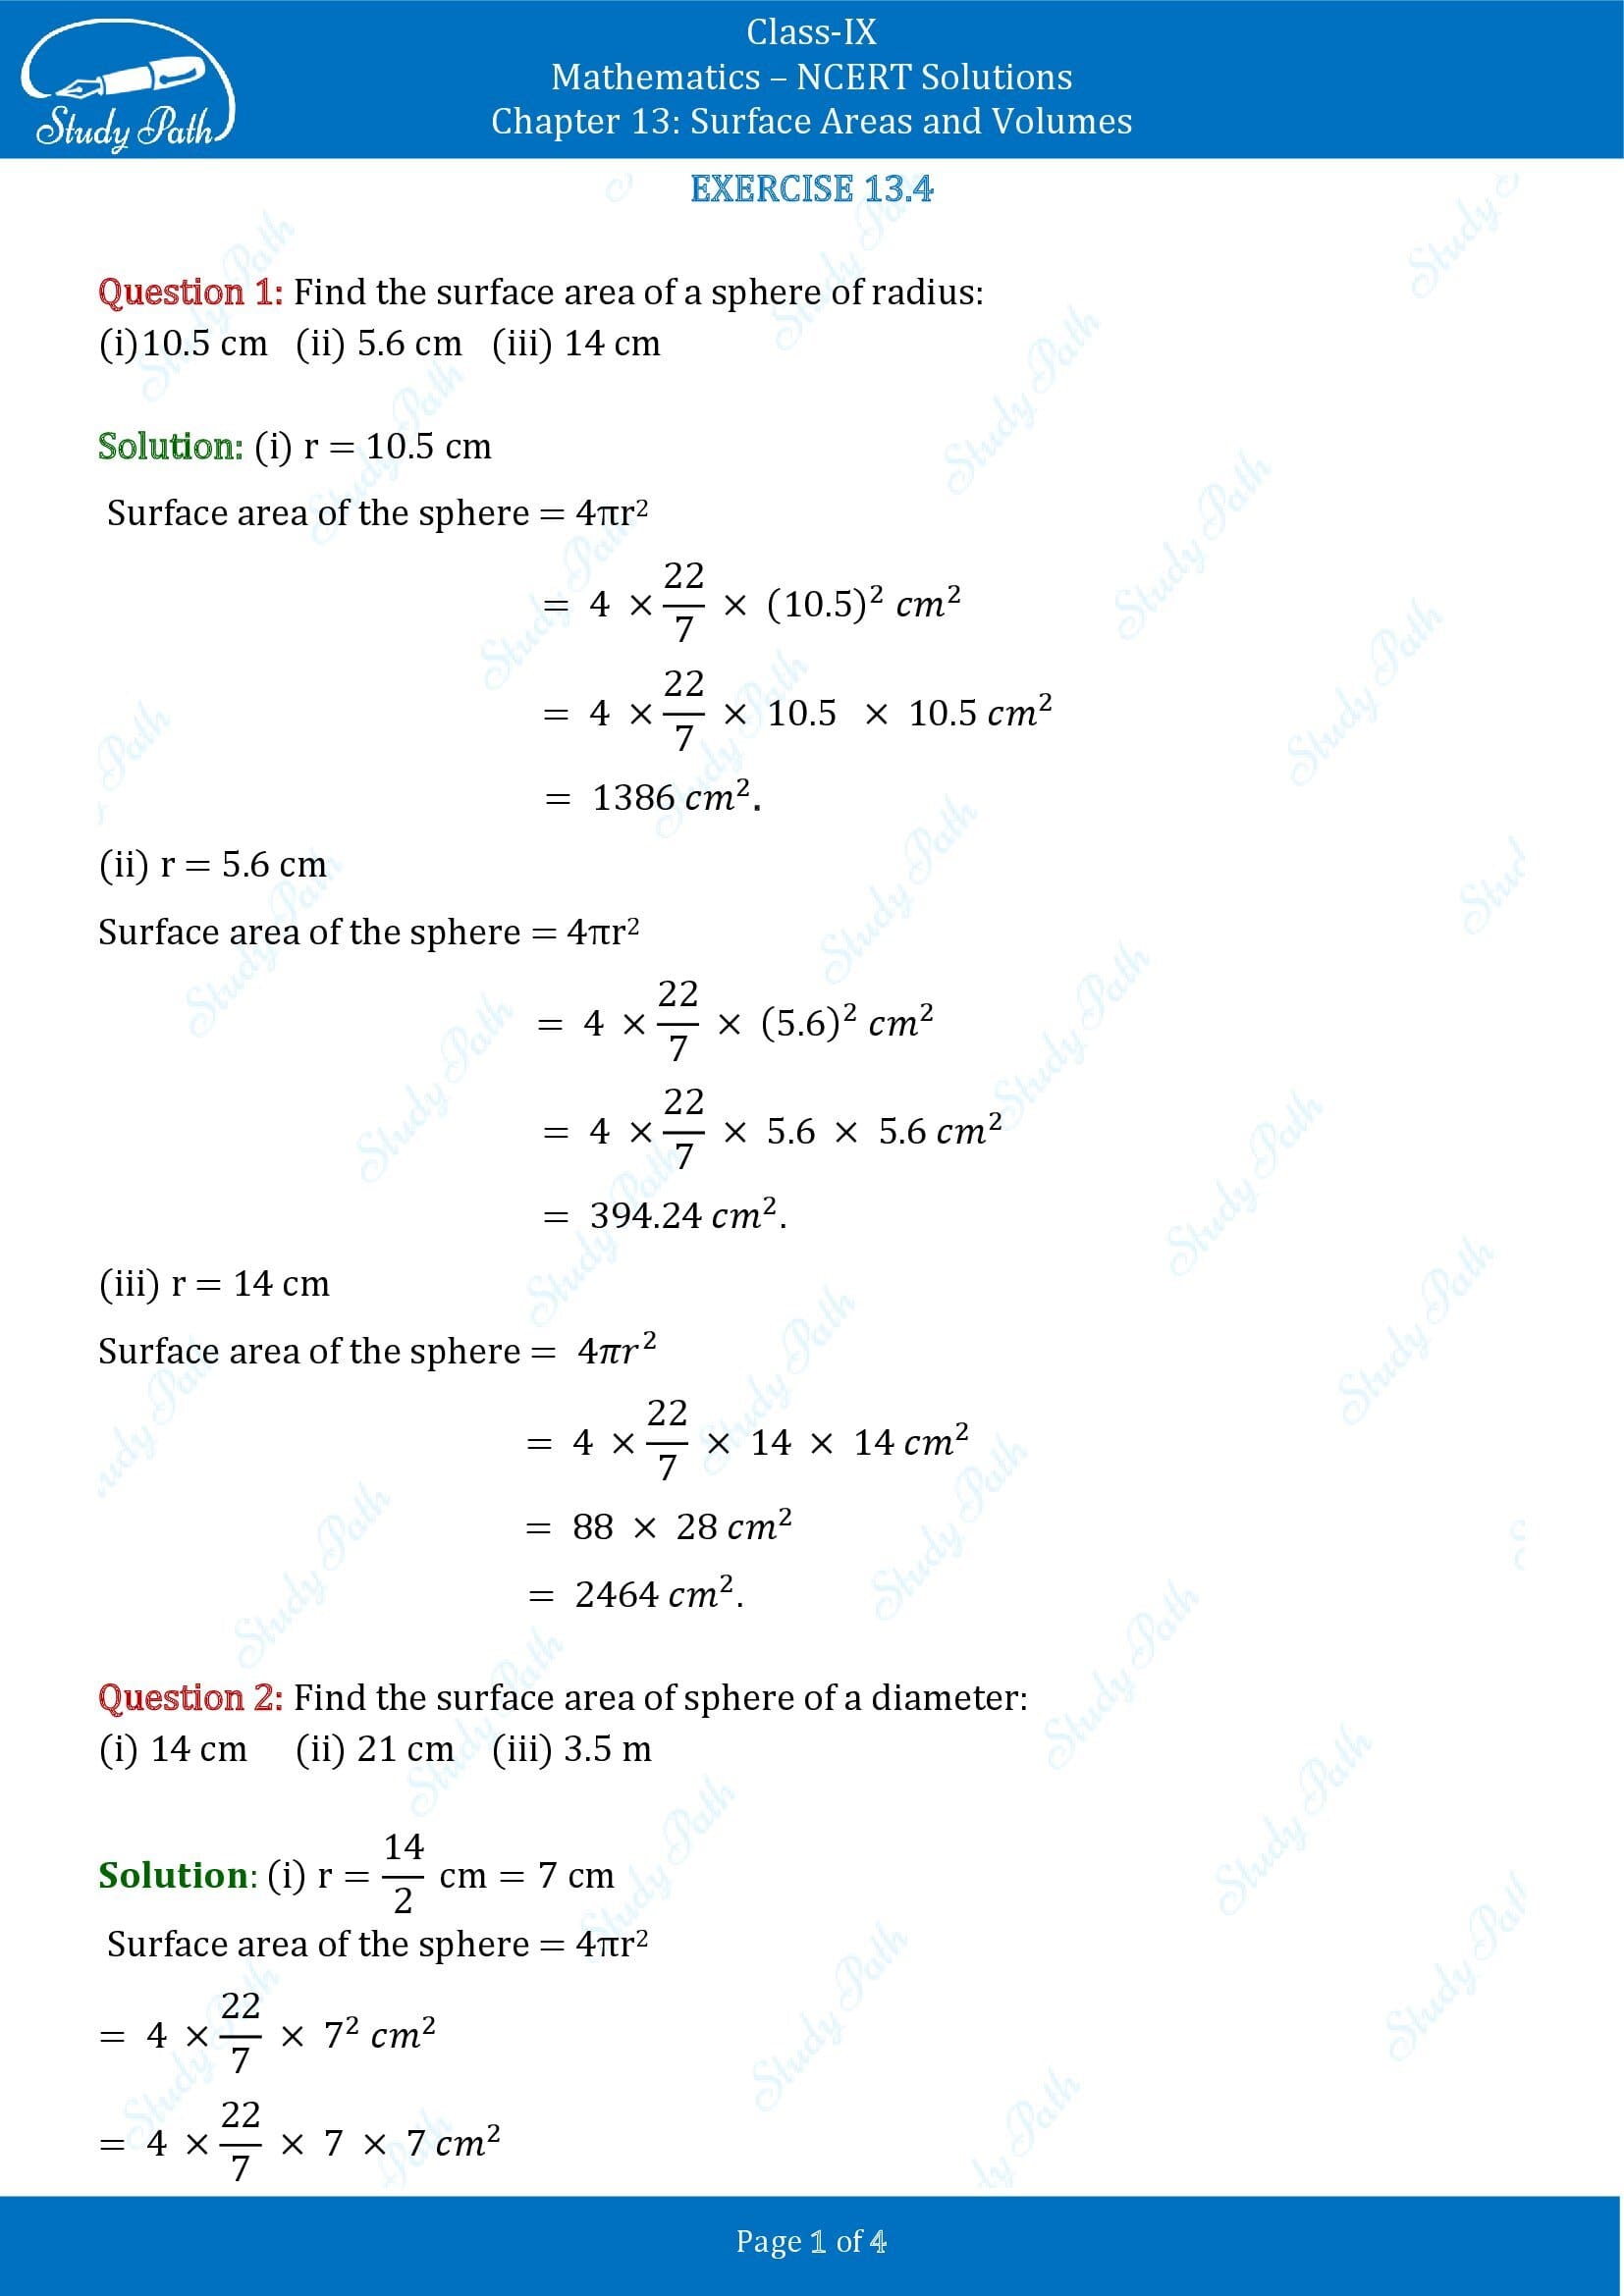 NCERT Solutions for Class 9 Maths Chapter 13 Surface Areas and Volumes Exercise 13.4 00001